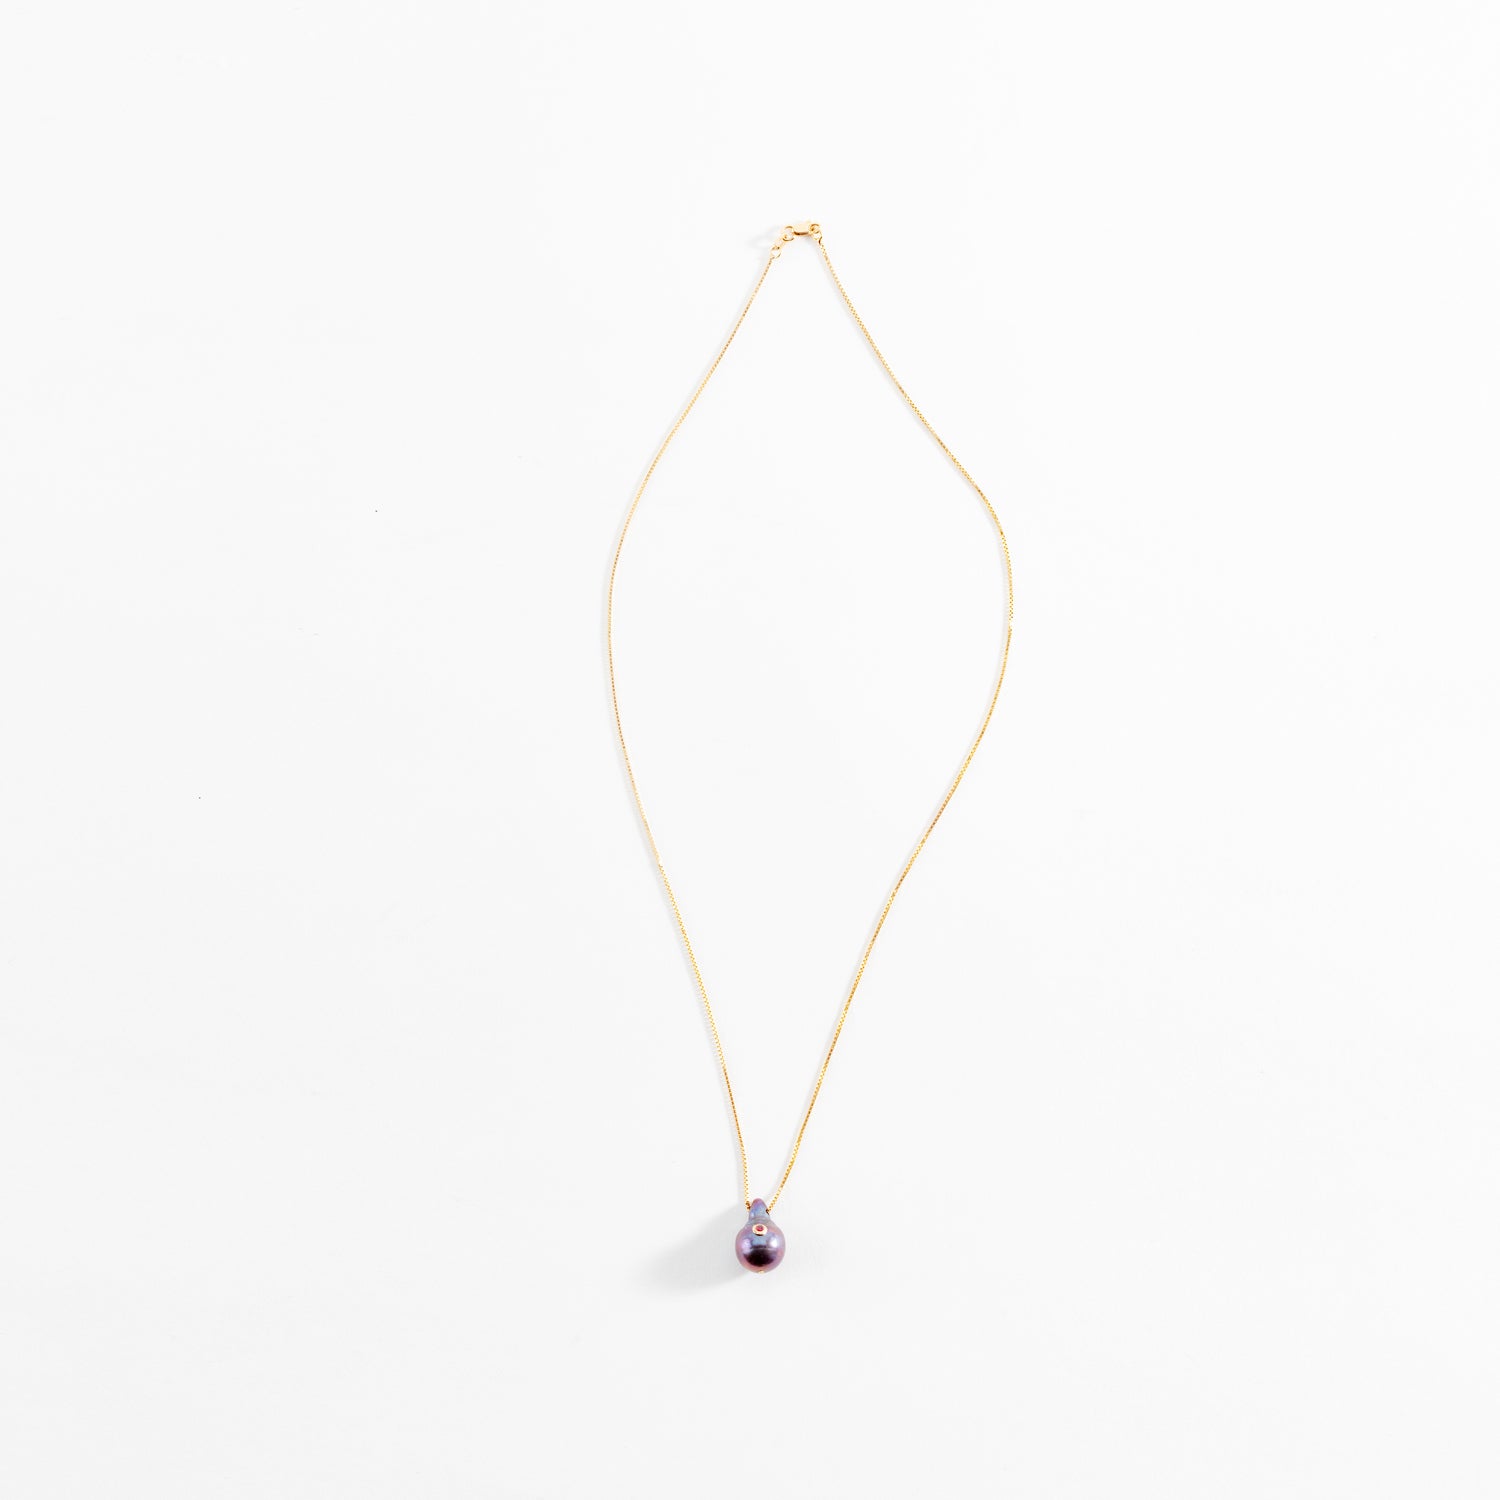 Elegant gold necklace with purple pearl pendant on white background.